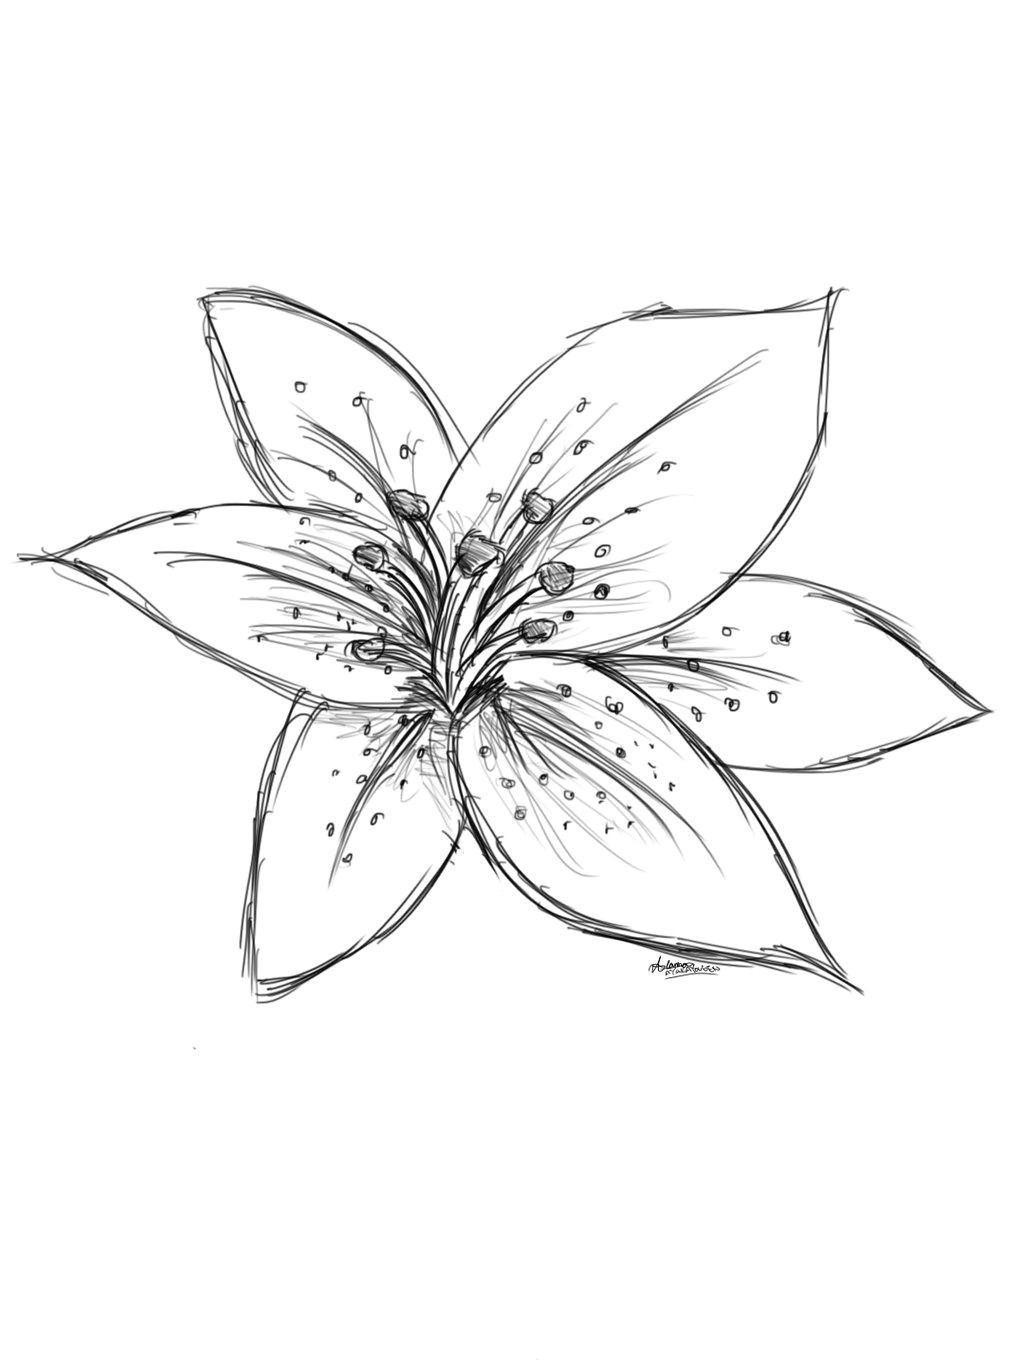 Drawing White Lily Flowers Image Result for Sketch Lily Flower Craft Watercolor Techniques